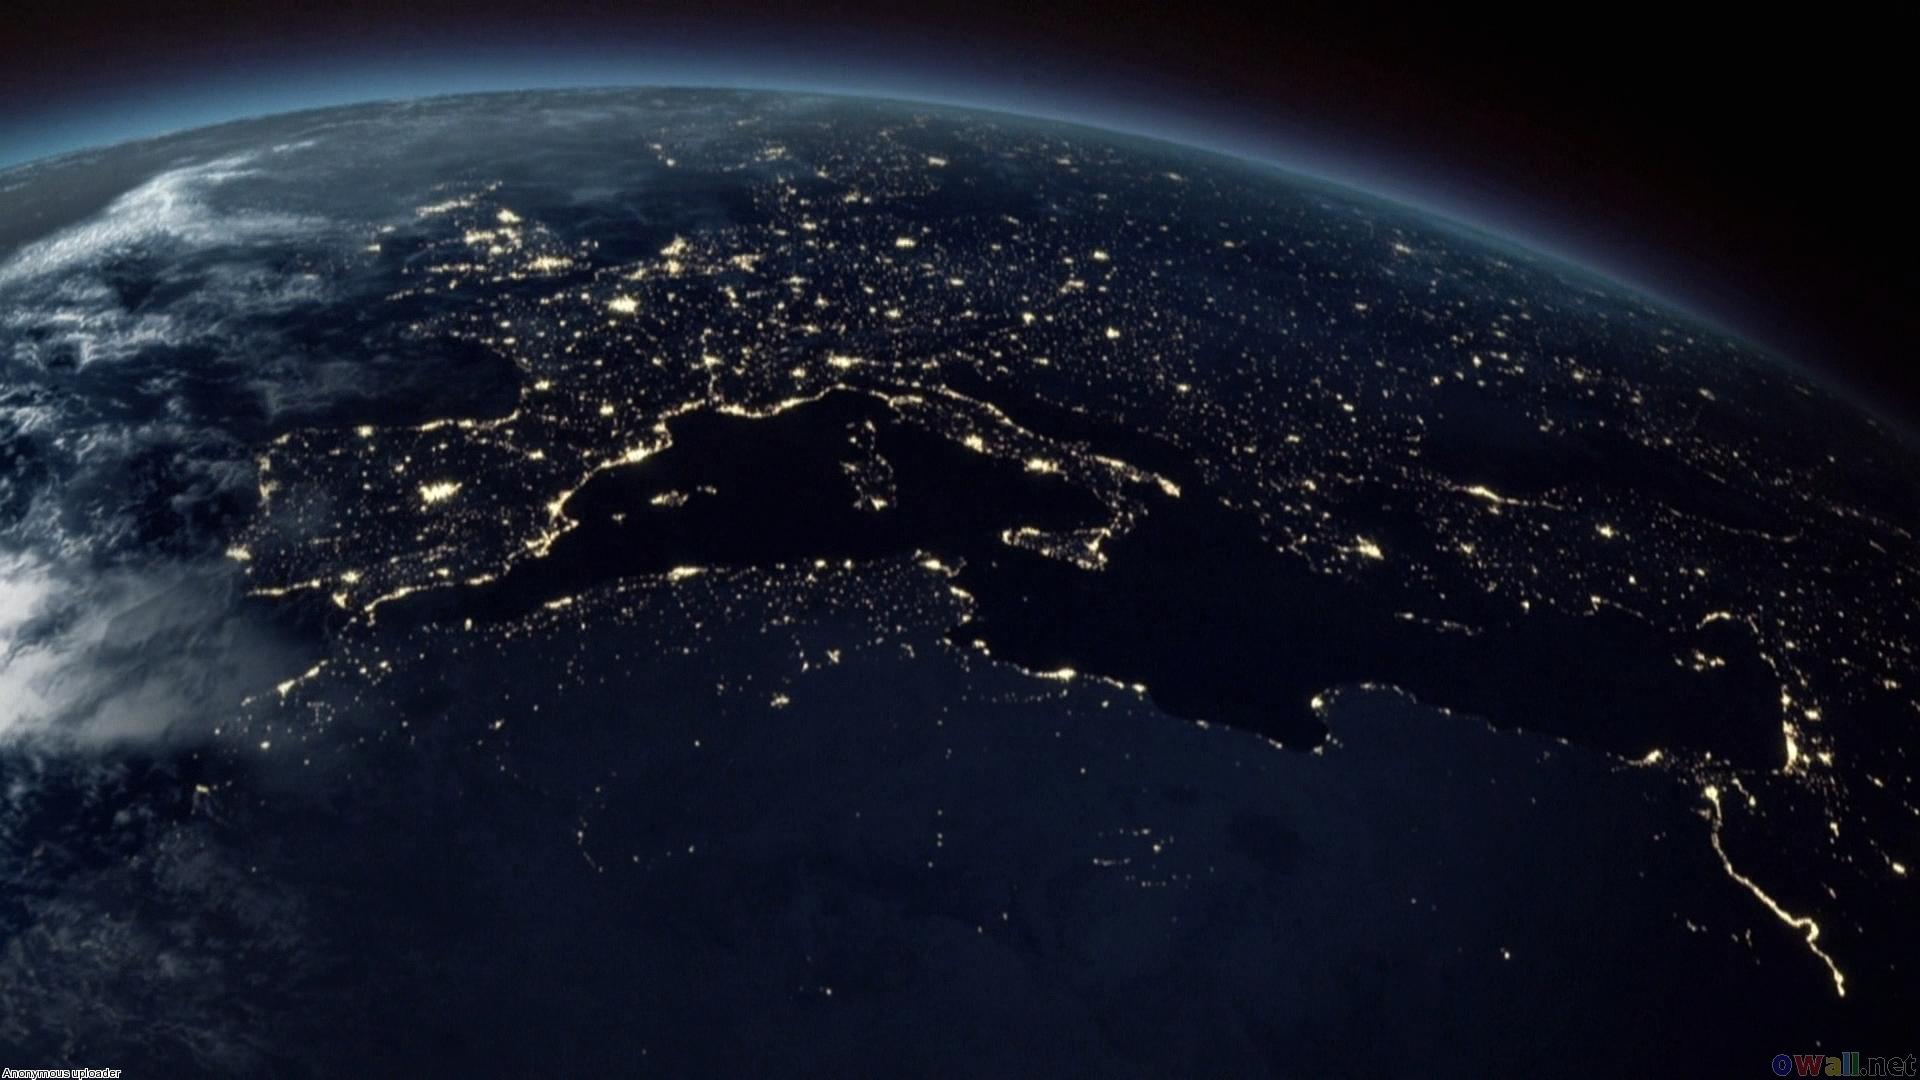 Wallpaper Europe And Italy From Space - 1920 x 1080 - Planets ...